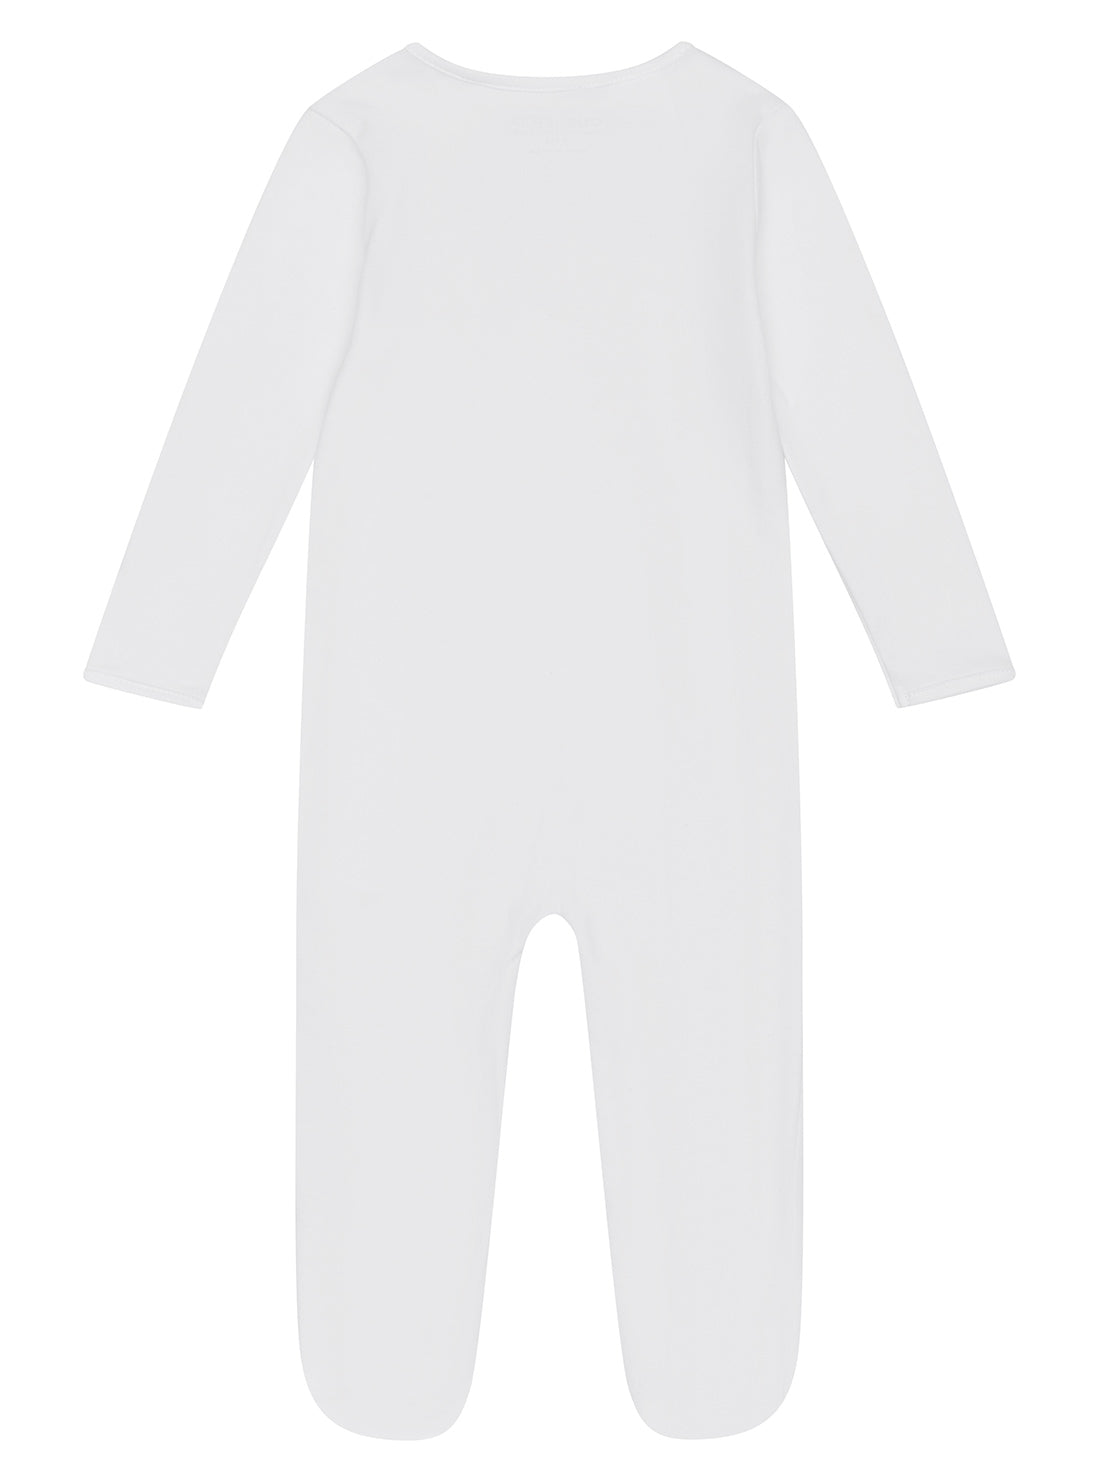 GUESS GUESS White Interlock Overall (0-12M) back view